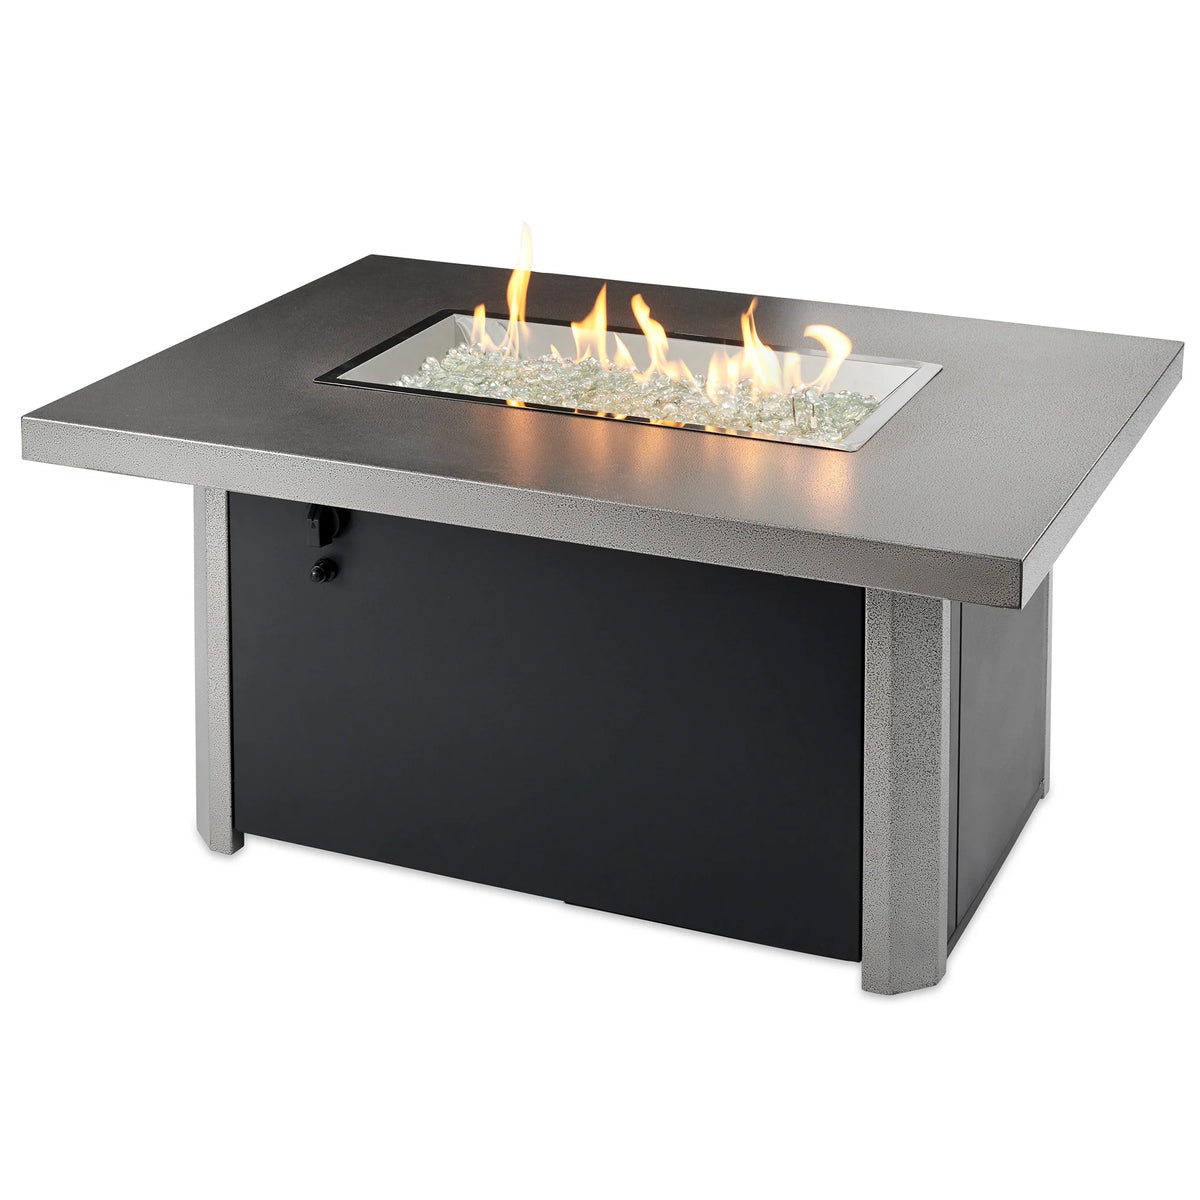 Outdoor GreatRoom Company Caden Rectangular Gas Fire Pit Table